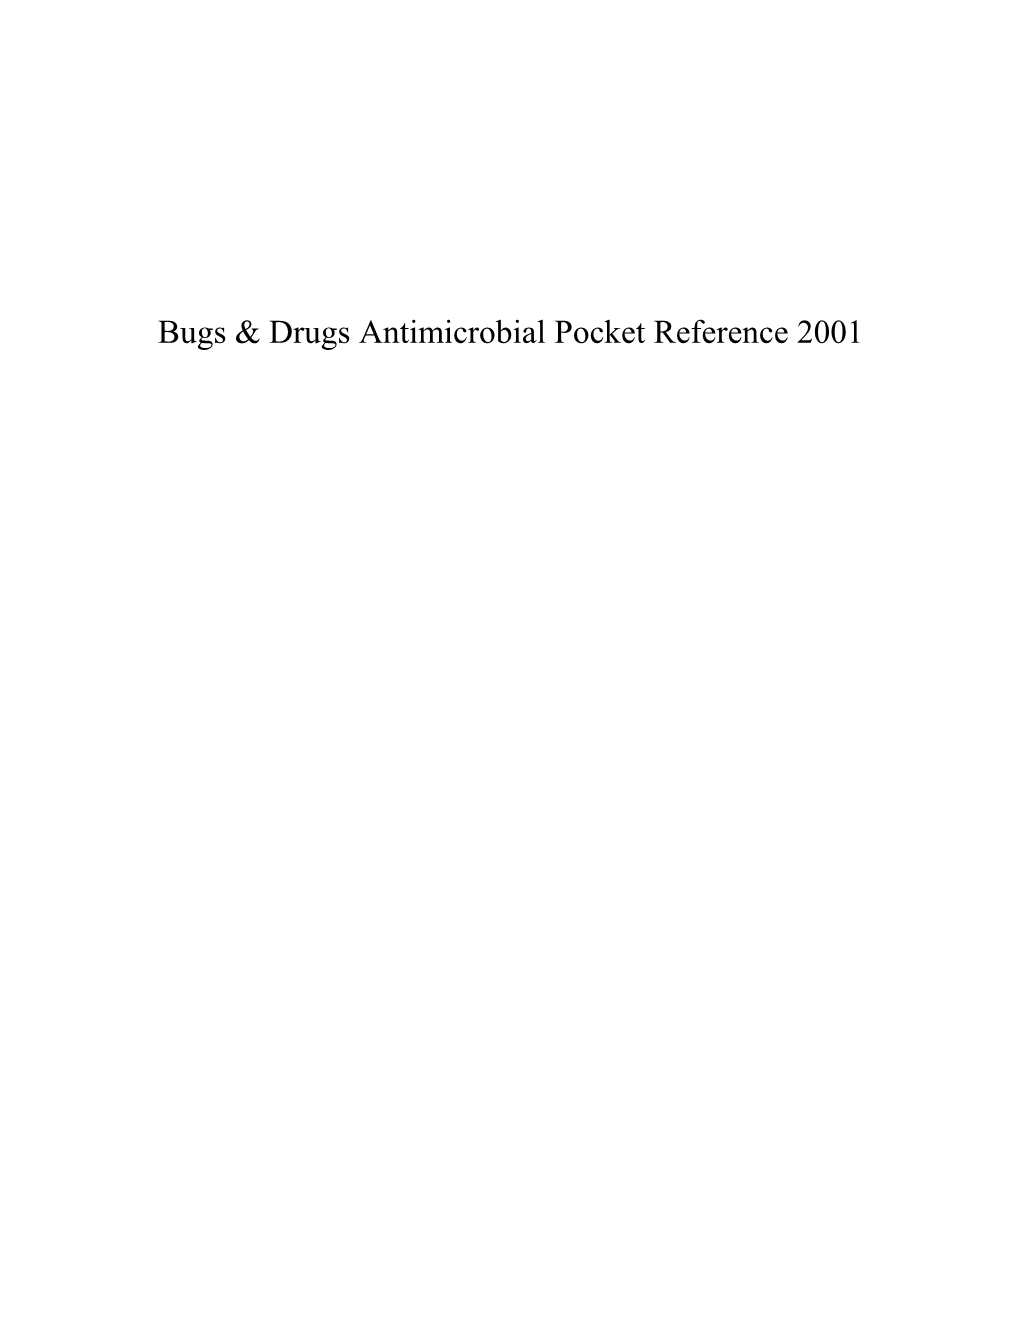 Bugs & Drugs Antimicrobial Pocket Reference 2001